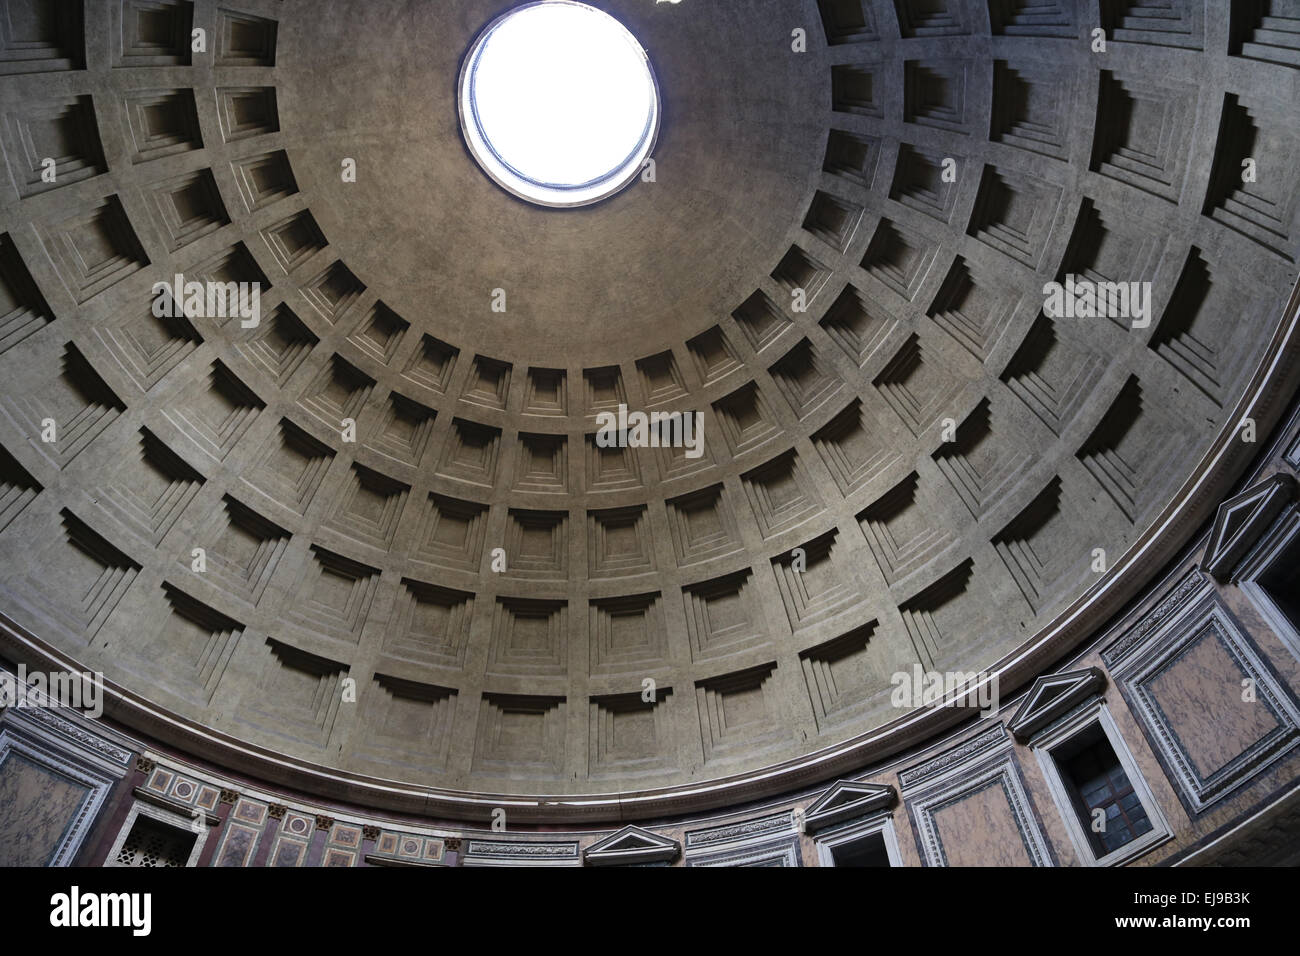 Italy. Rome. Pantheon. Roman temple. The Oculus in the dome. Stock Photo